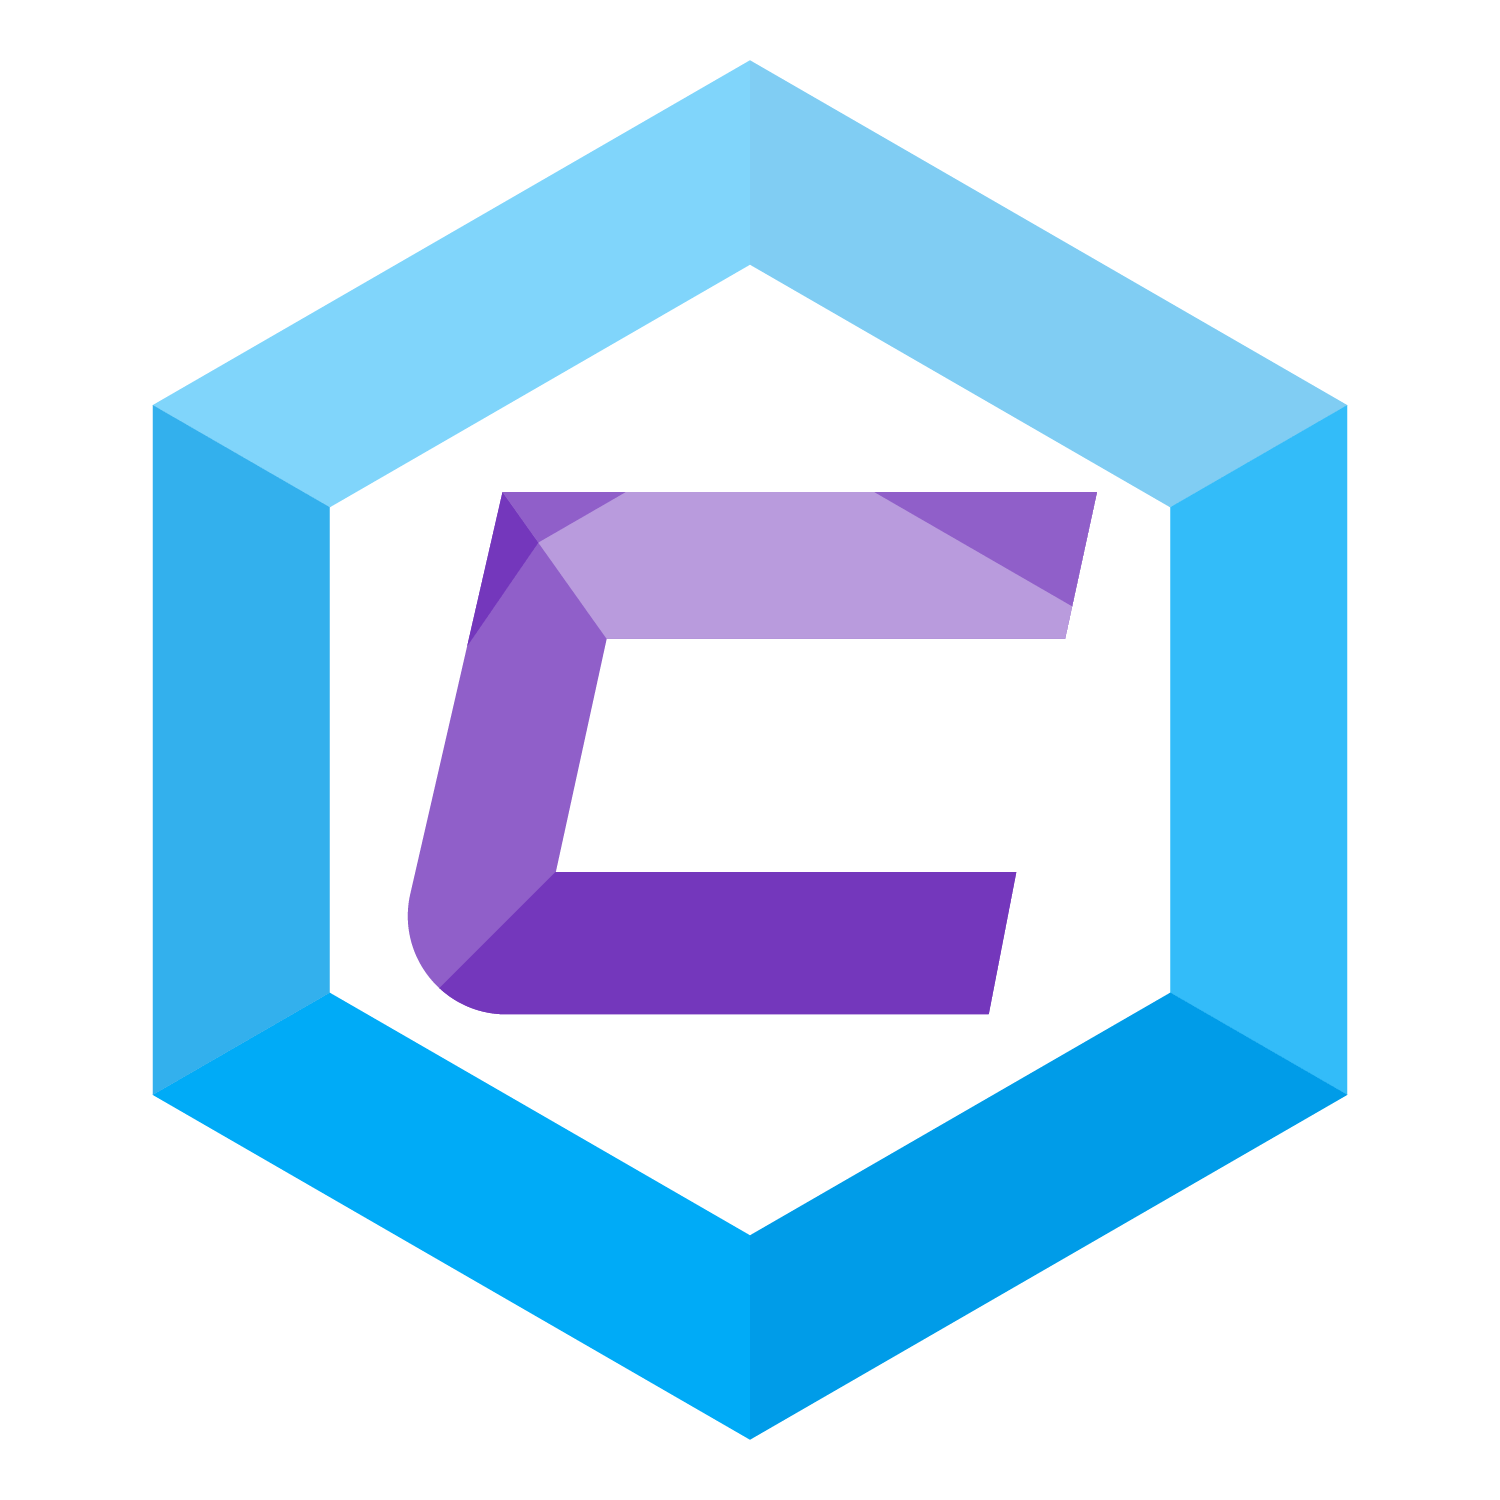 Purple C Logo - How to make logo more 3D while flat? - Graphic Design Stack Exchange